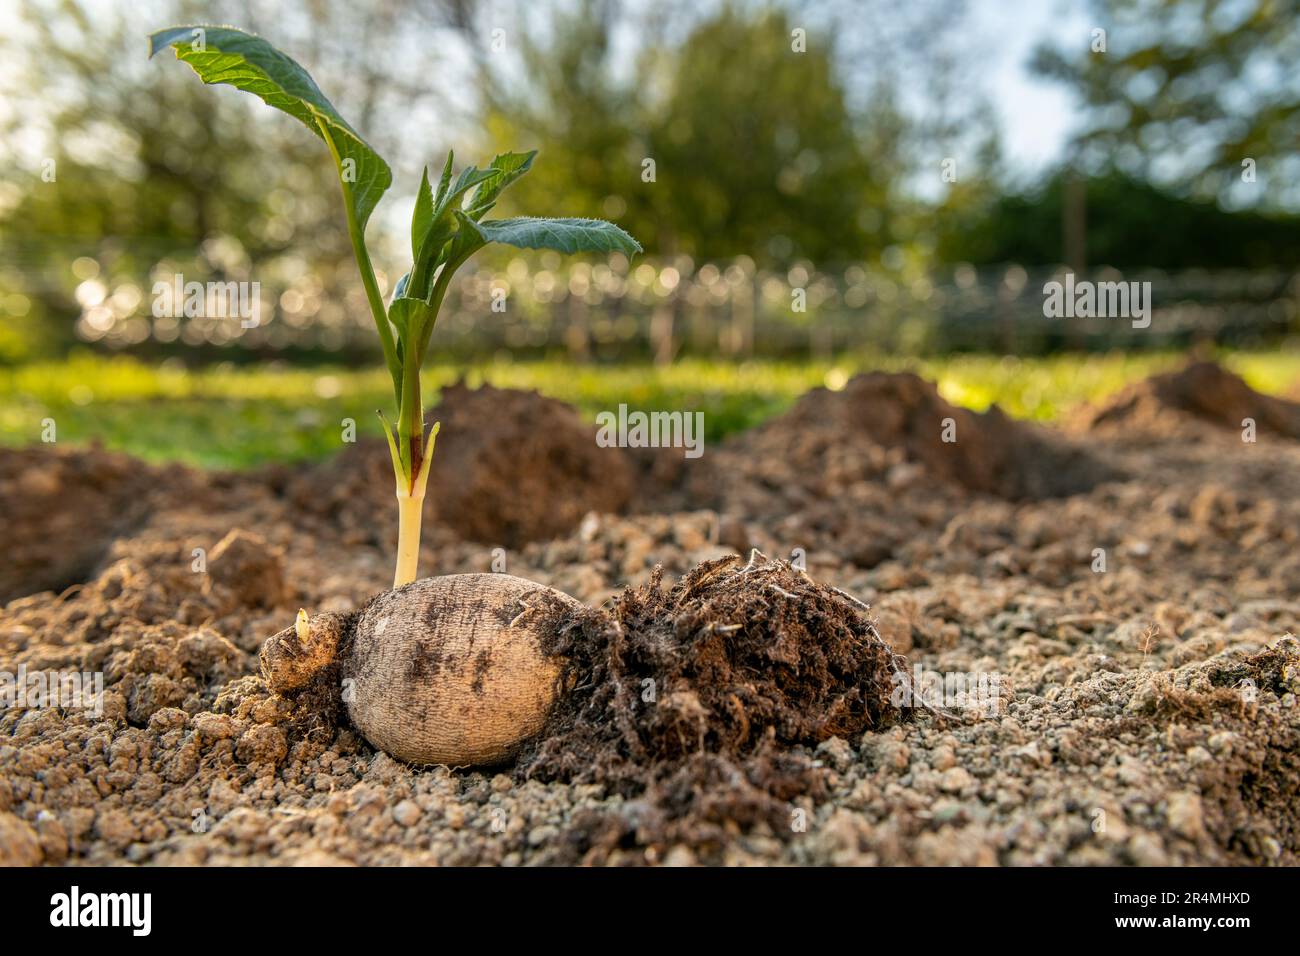 Planting dahlia plants in a flowerbed. Presprouted dahlia tubers in ornamental garden. Stock Photo